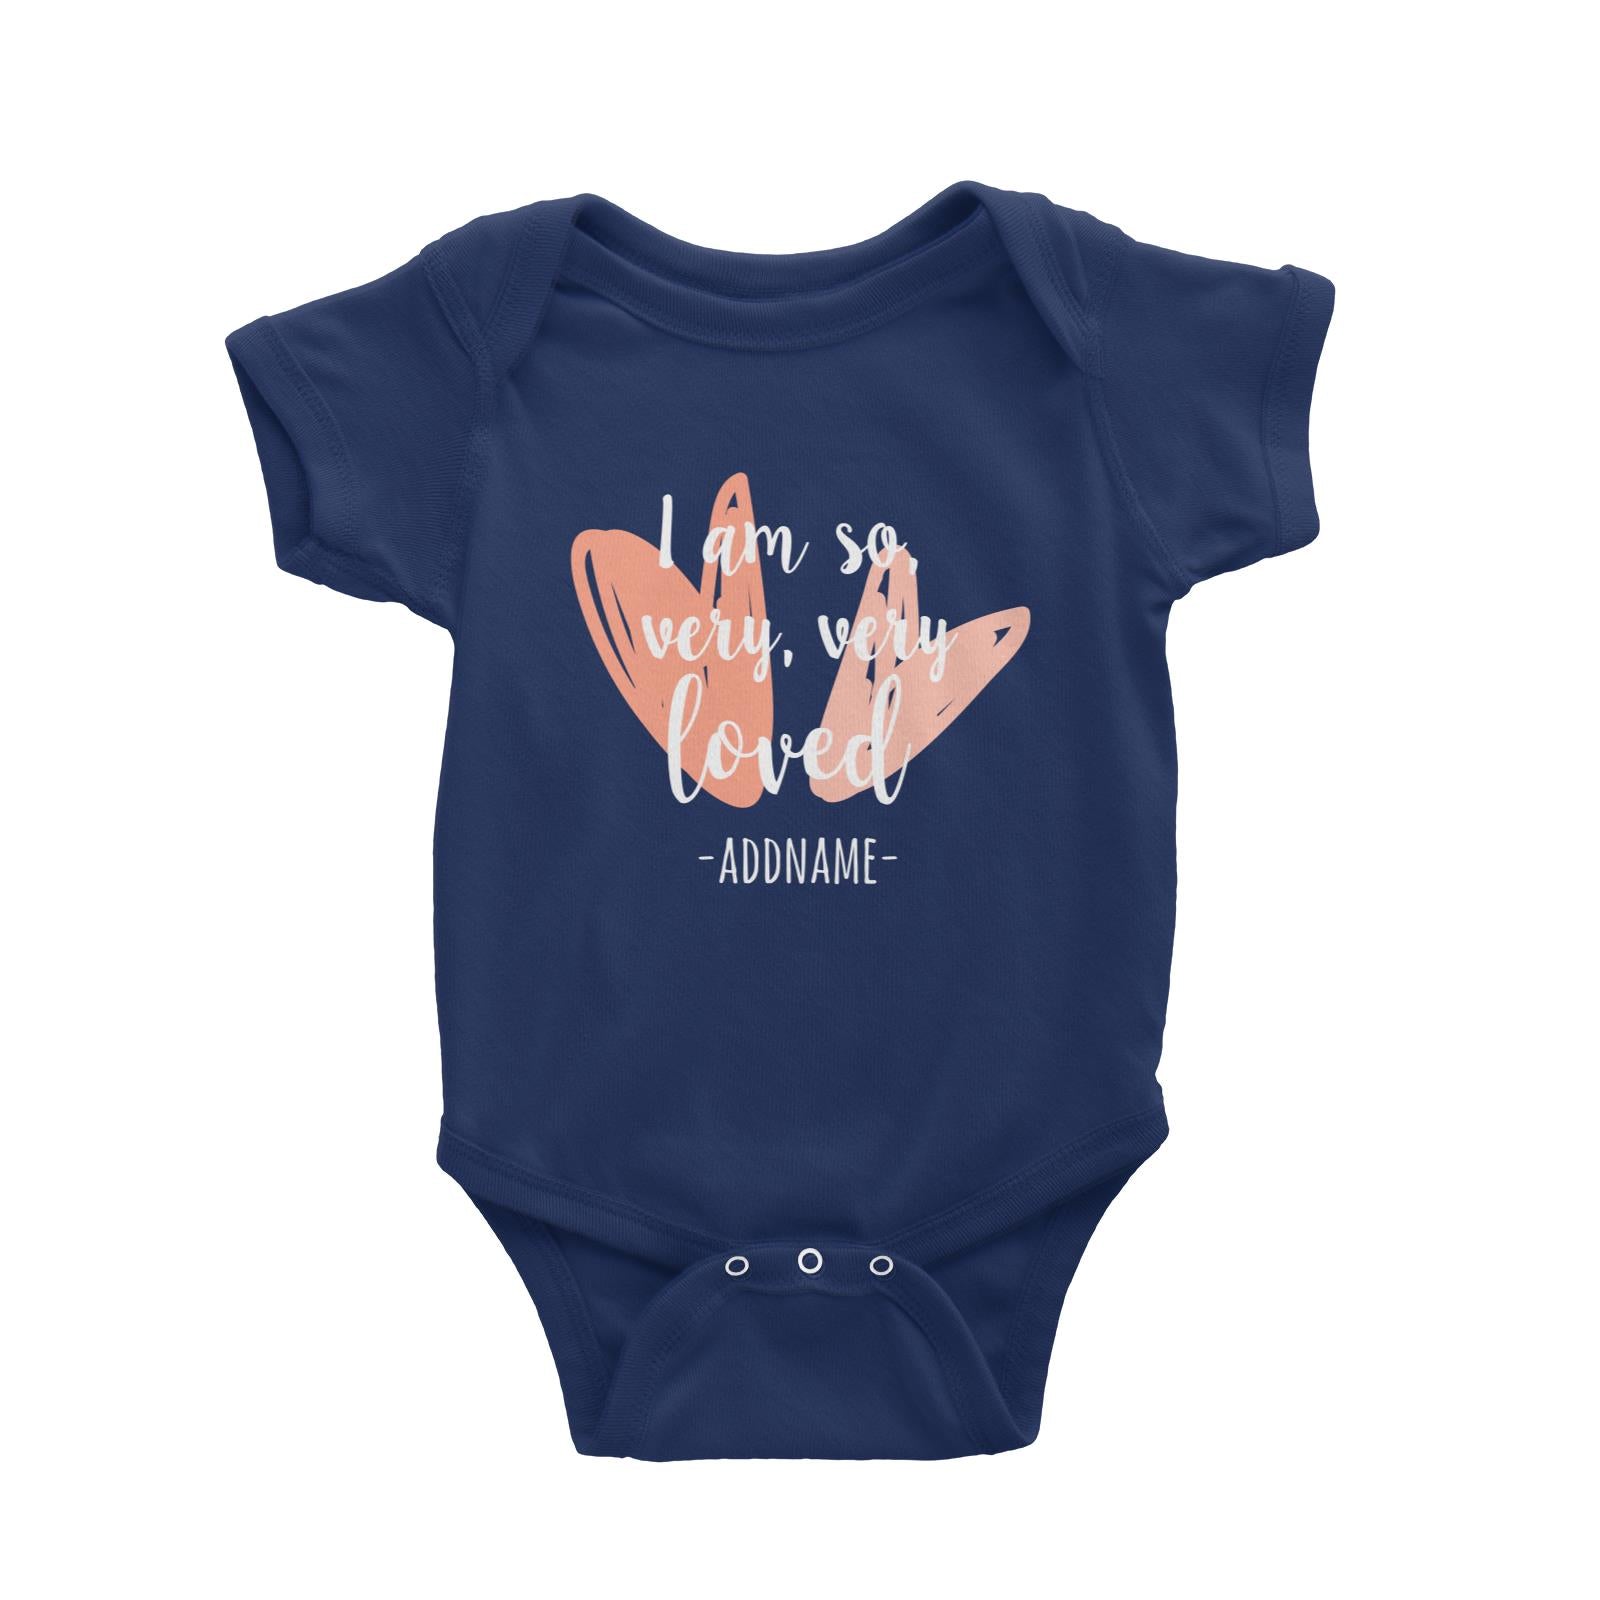 I am So Very Very Loved Addname with Heart Shapes Baby Romper Personalizable Designs Basic Newborn